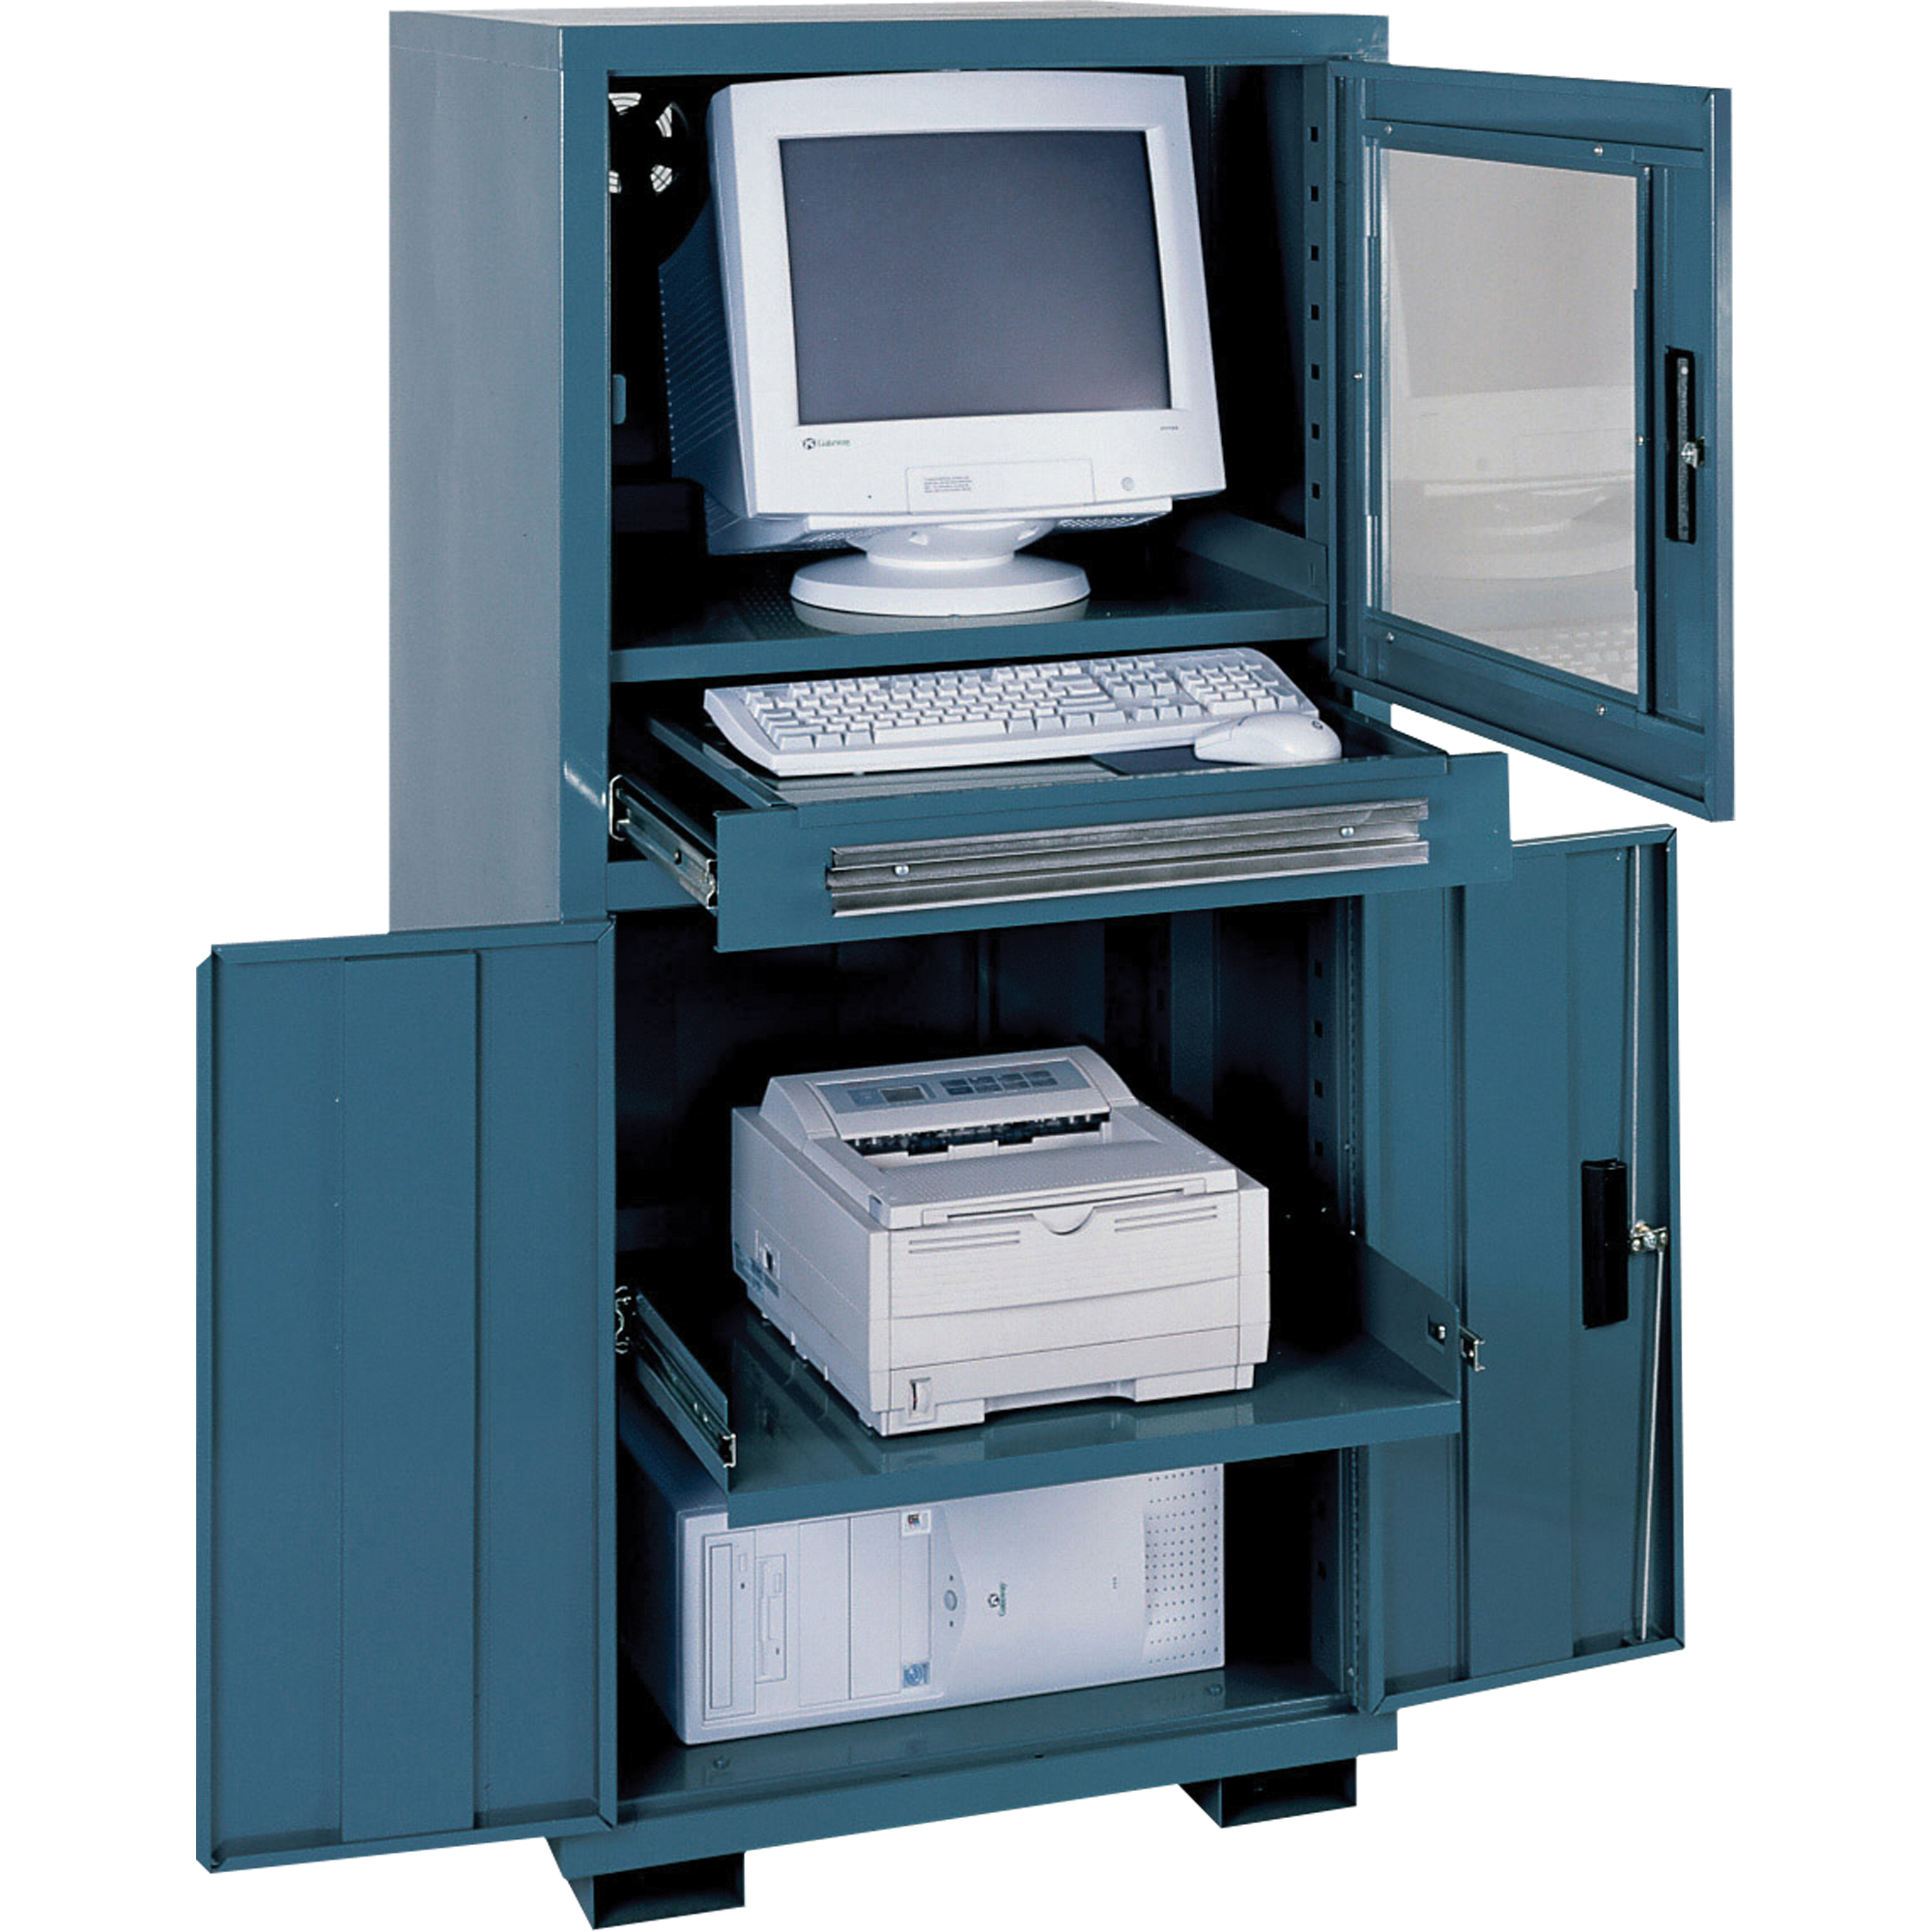 Edsal Computer Cabinets For Harsh Environments On574 Csc6850